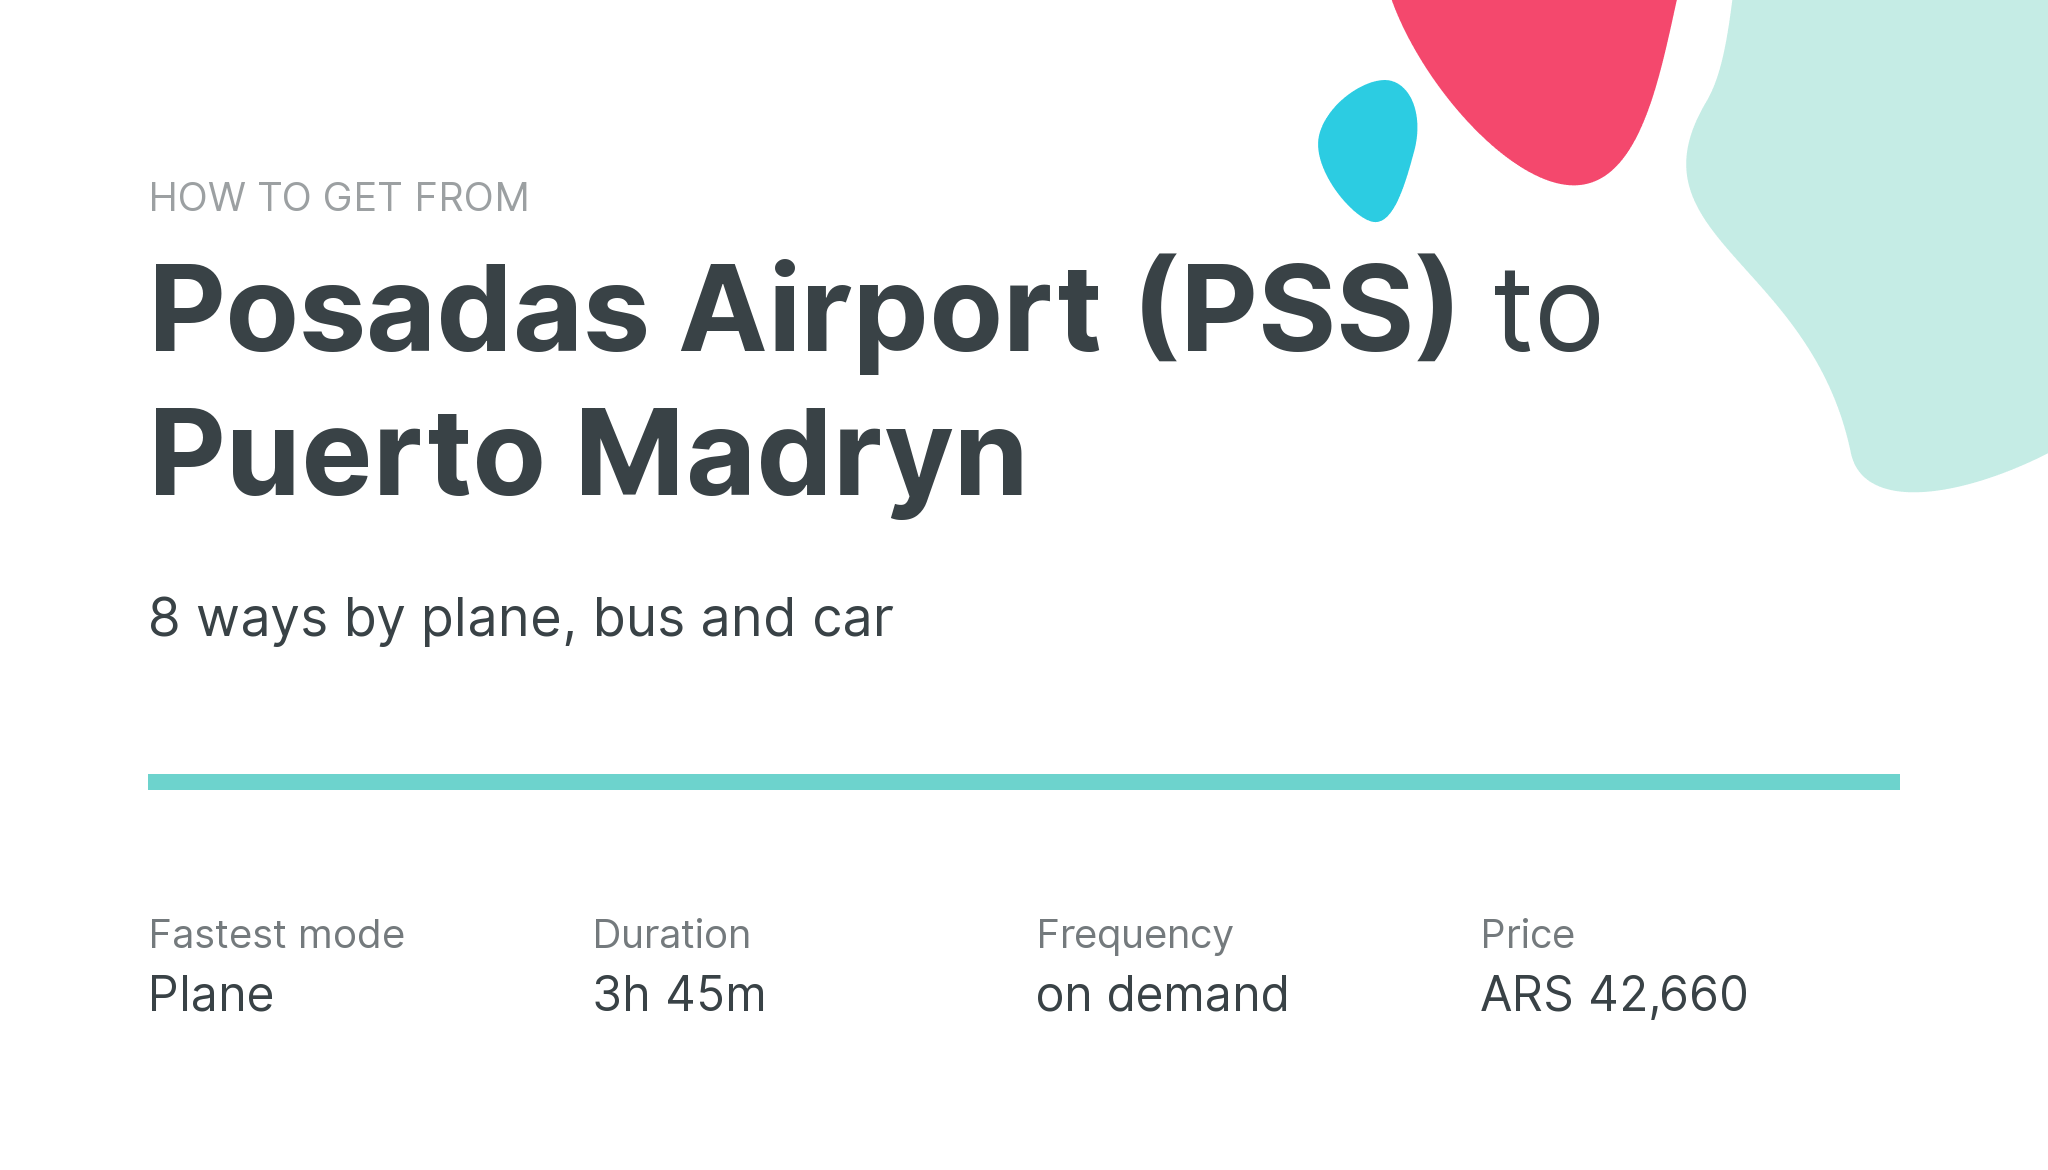 How do I get from Posadas Airport (PSS) to Puerto Madryn